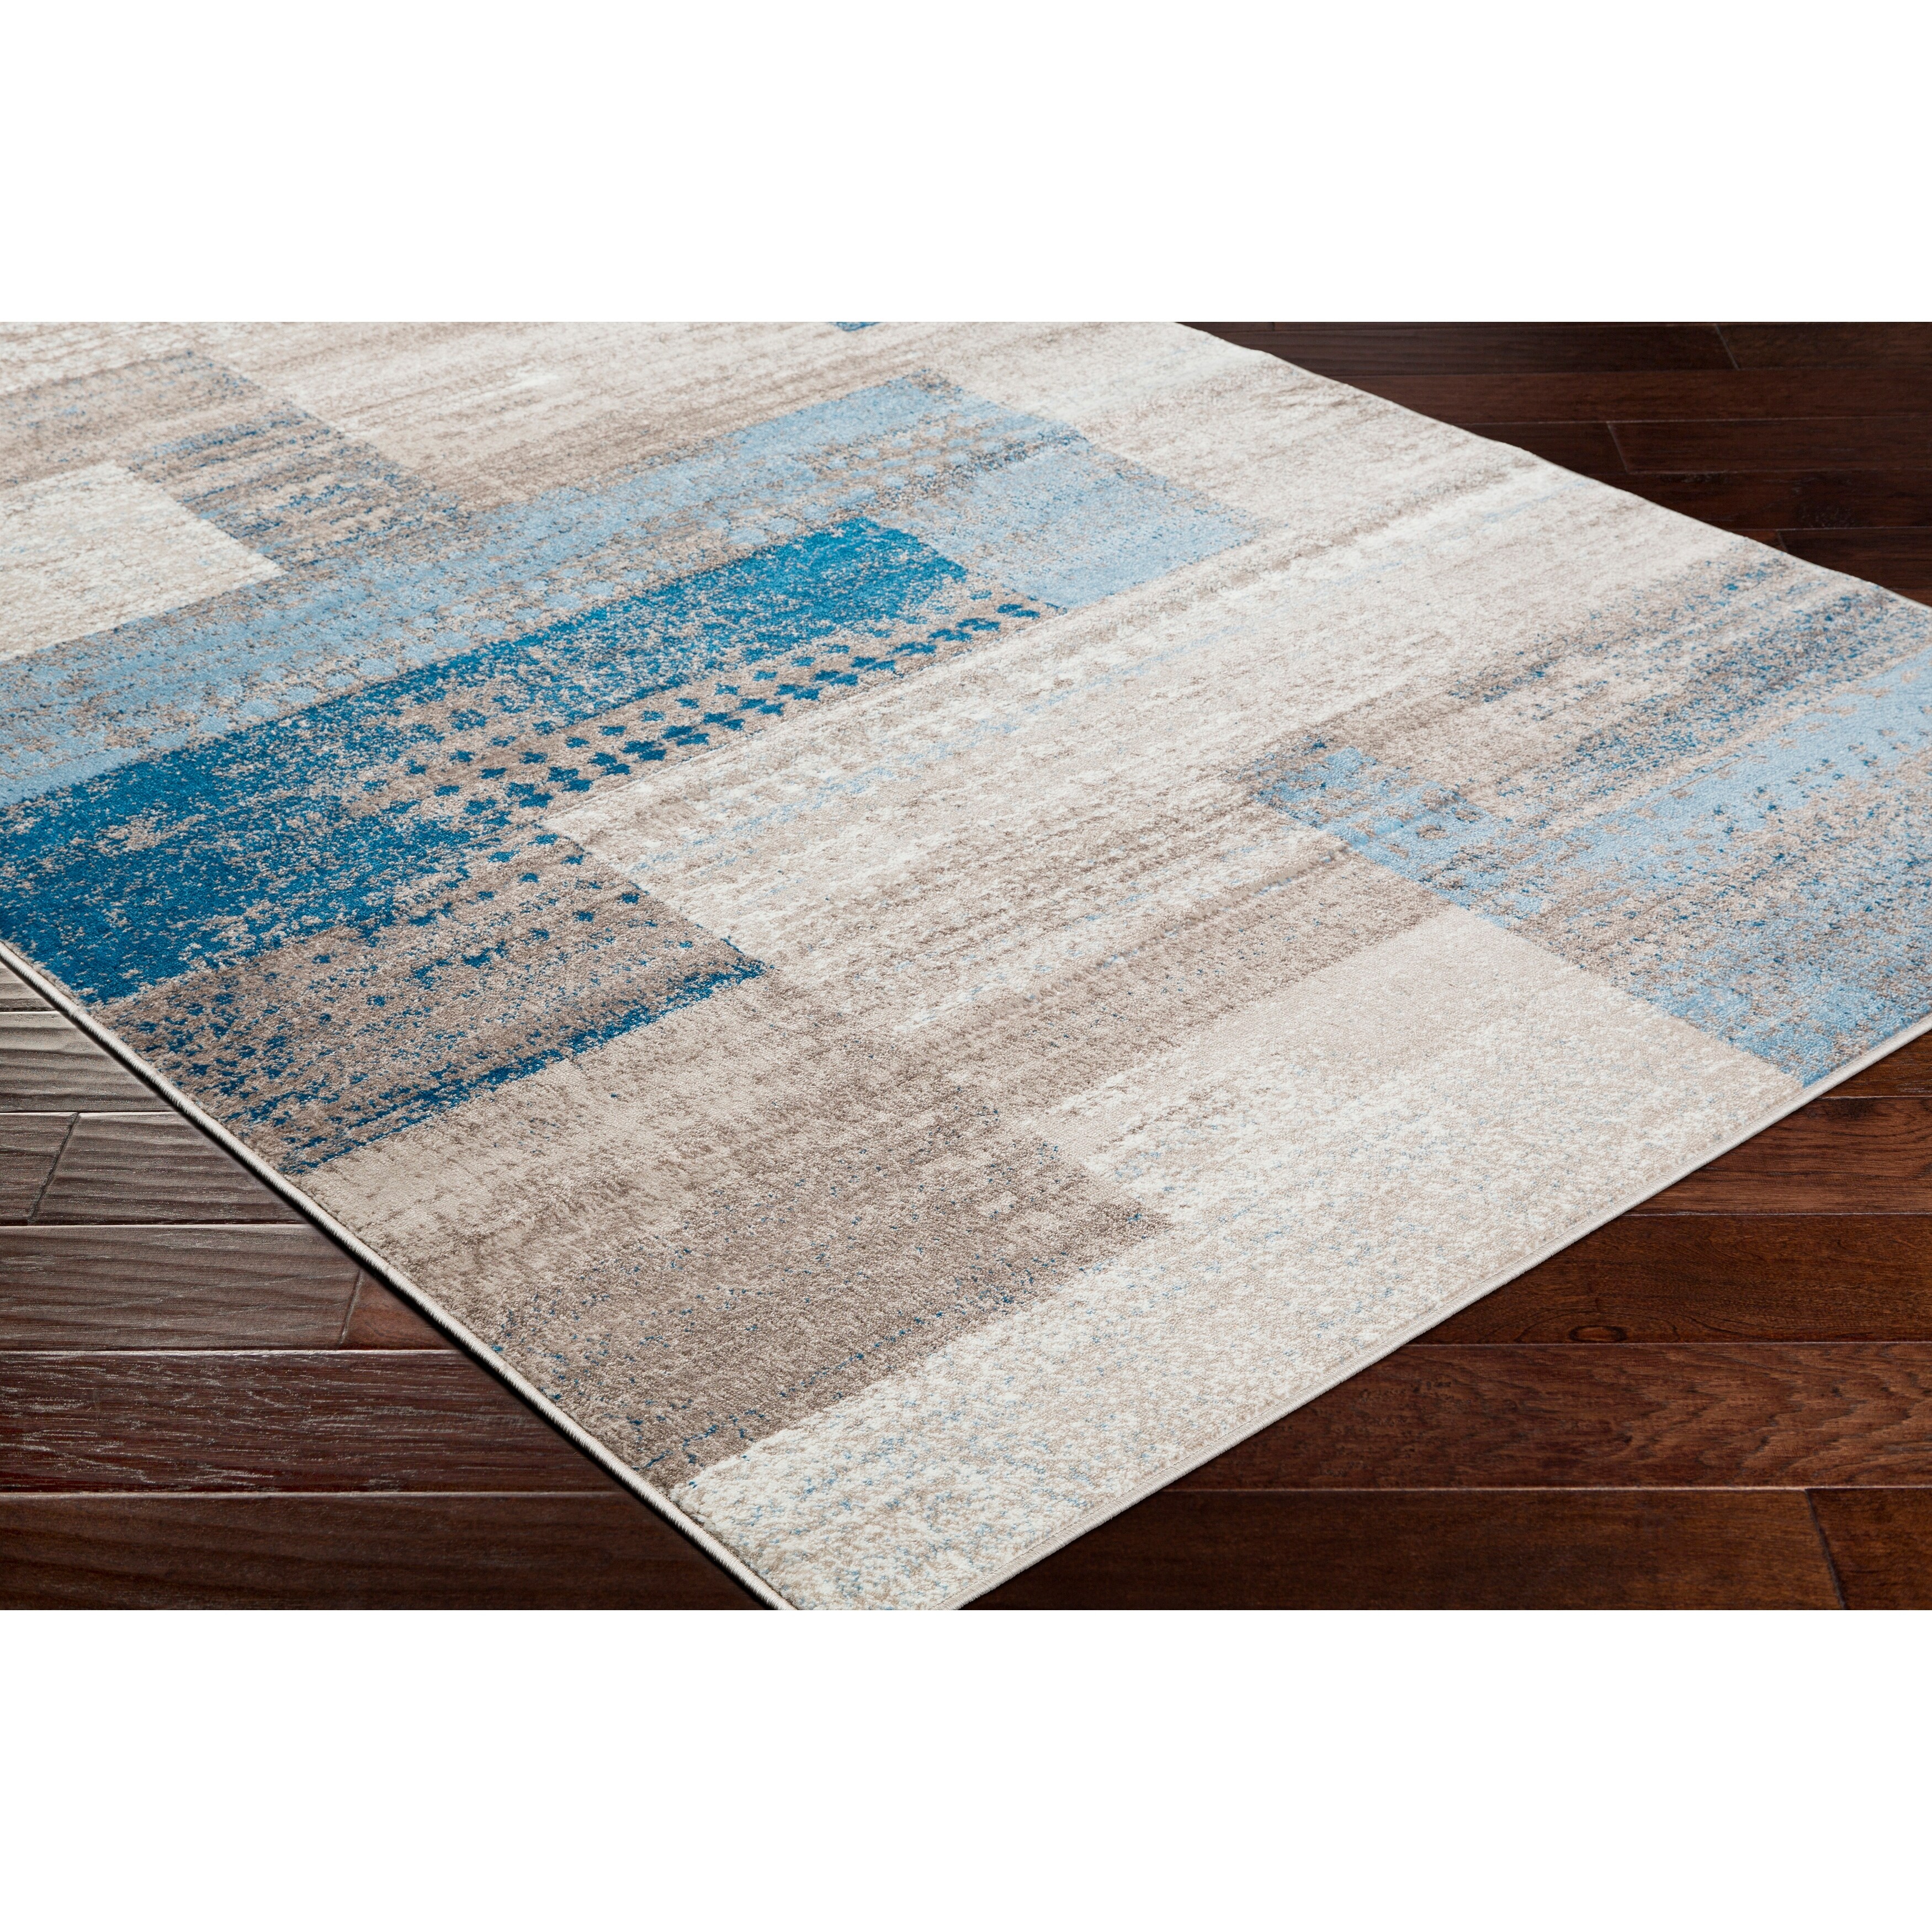 https://ak1.ostkcdn.com/images/products/is/images/direct/2a38e8f7ba9f088759159e5008b1ebb7d91098b6/Colma-Color-Block-Multicolor-Area-Rug.jpg